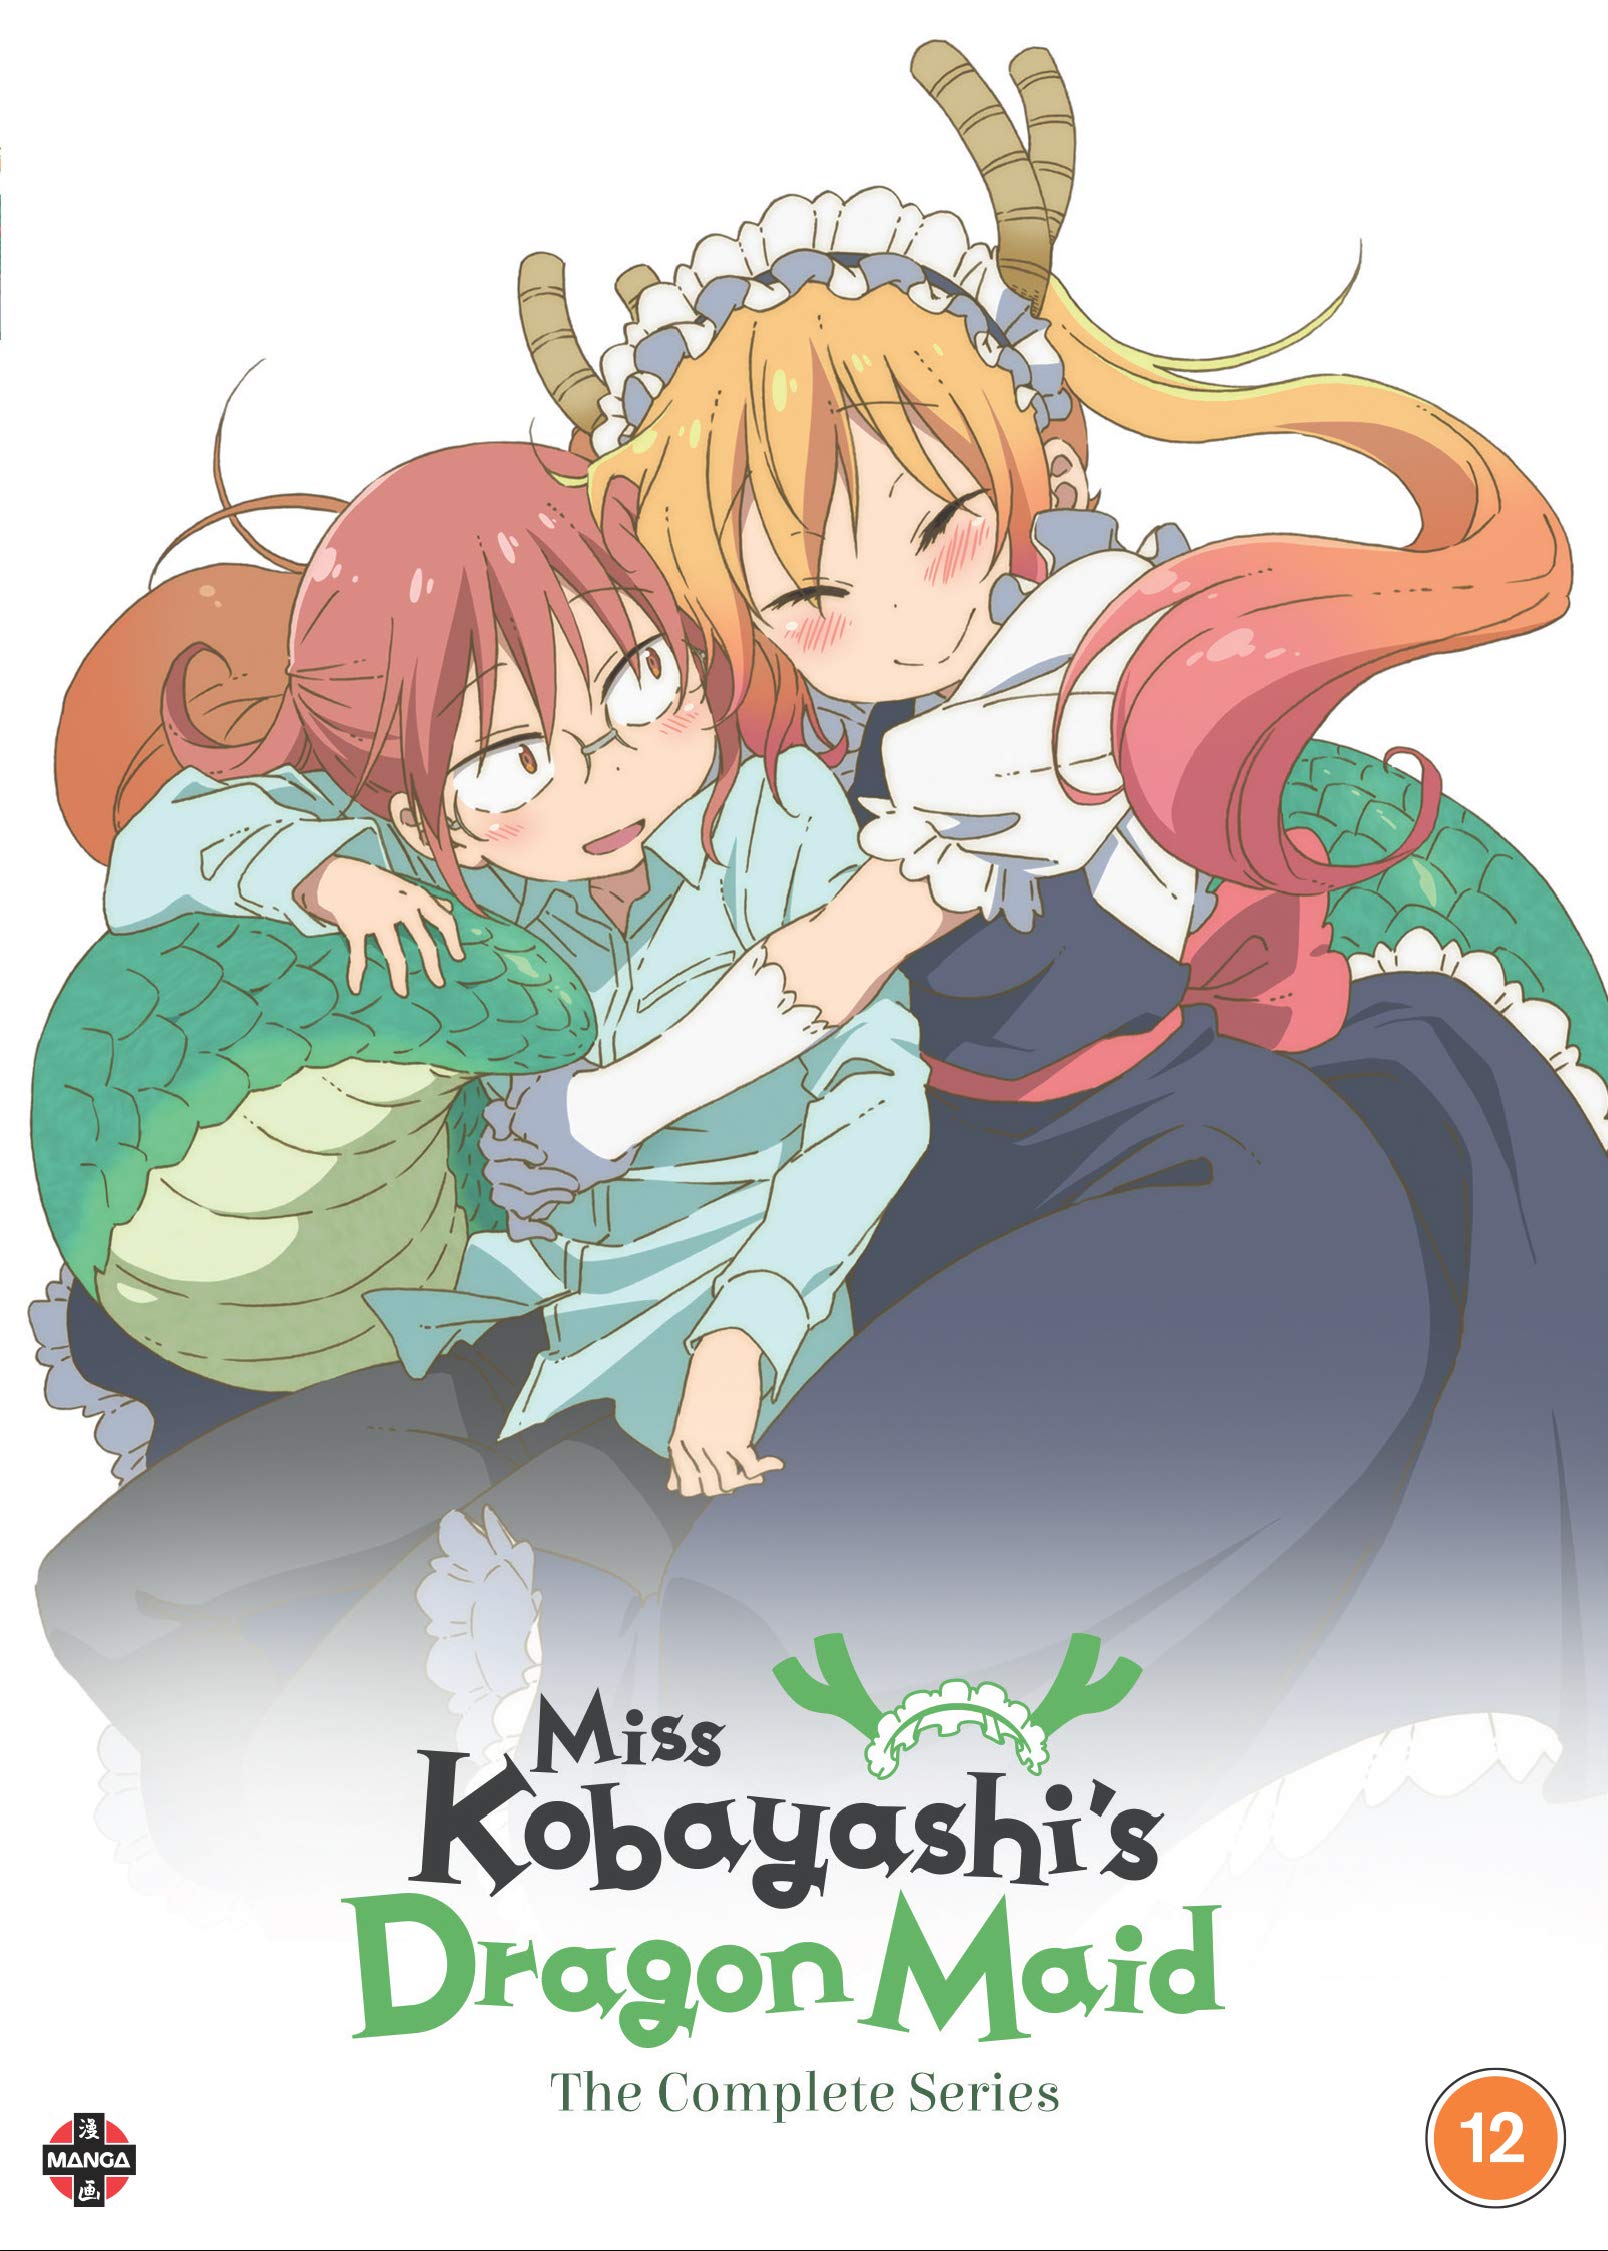 Dragon Maid S Episode 4 Preview, Spoilers And Release Date